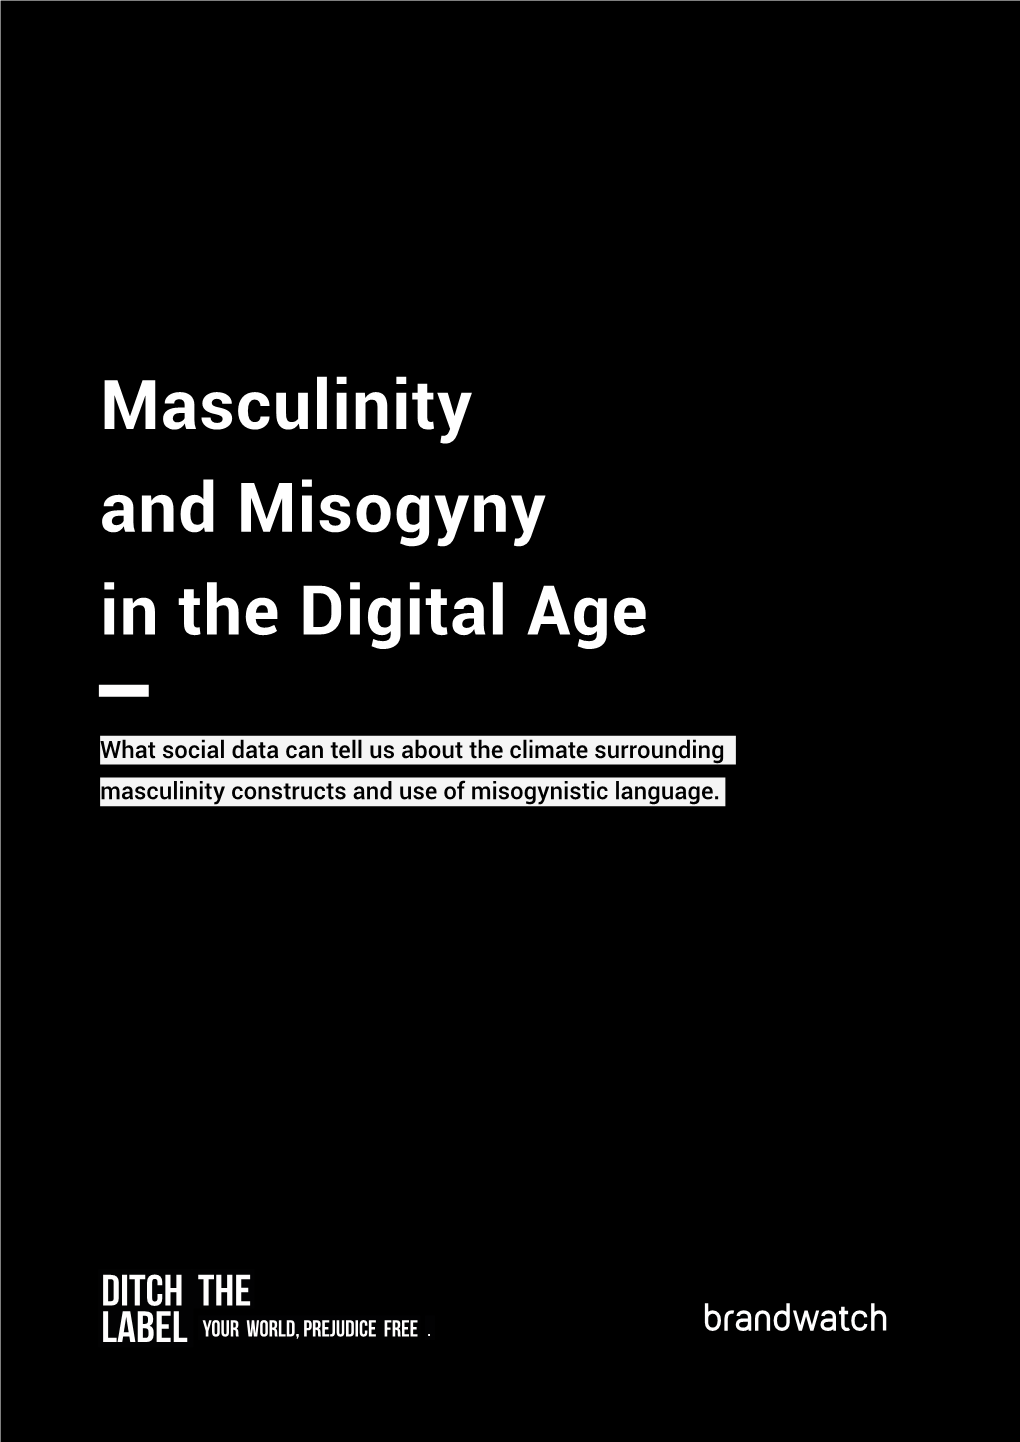 Masculinity and Misogyny in the Digital Age